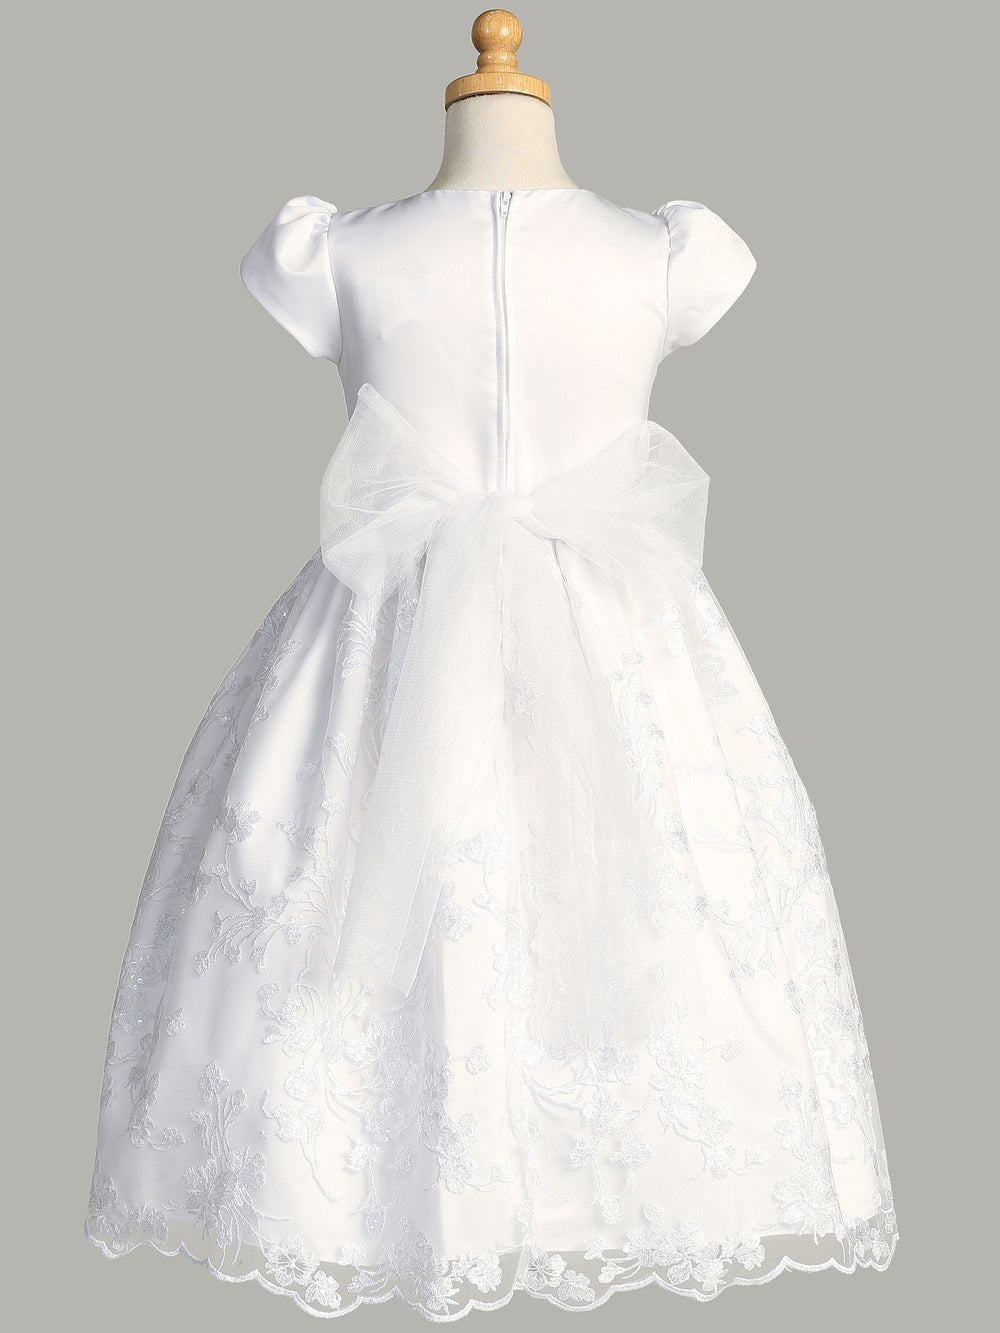 Close-up view of the satin bodice and embroidered tulle skirt with sequins on the First Communion Dress.